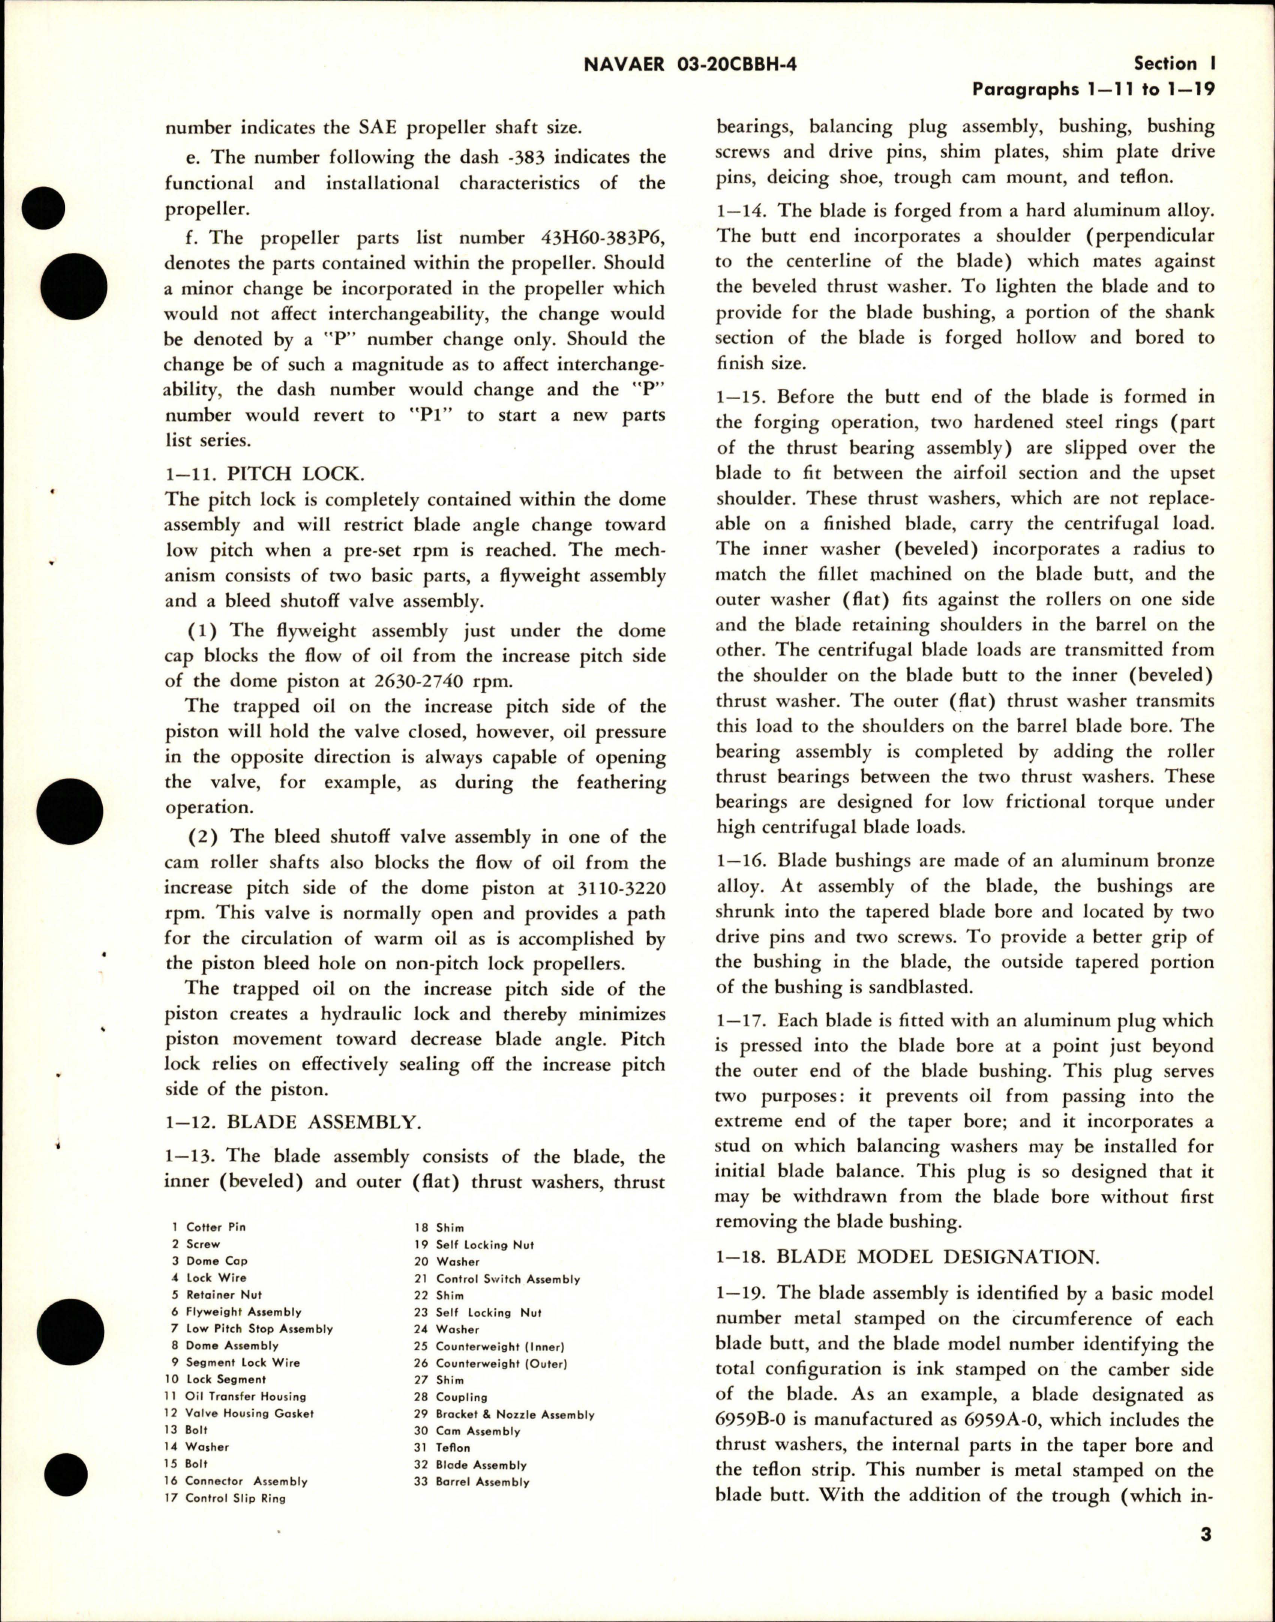 Sample page 7 from AirCorps Library document: Operation and Maintenance Instructions for Variable Pitch Propeller - Model 43H60-359 and 43H60-383